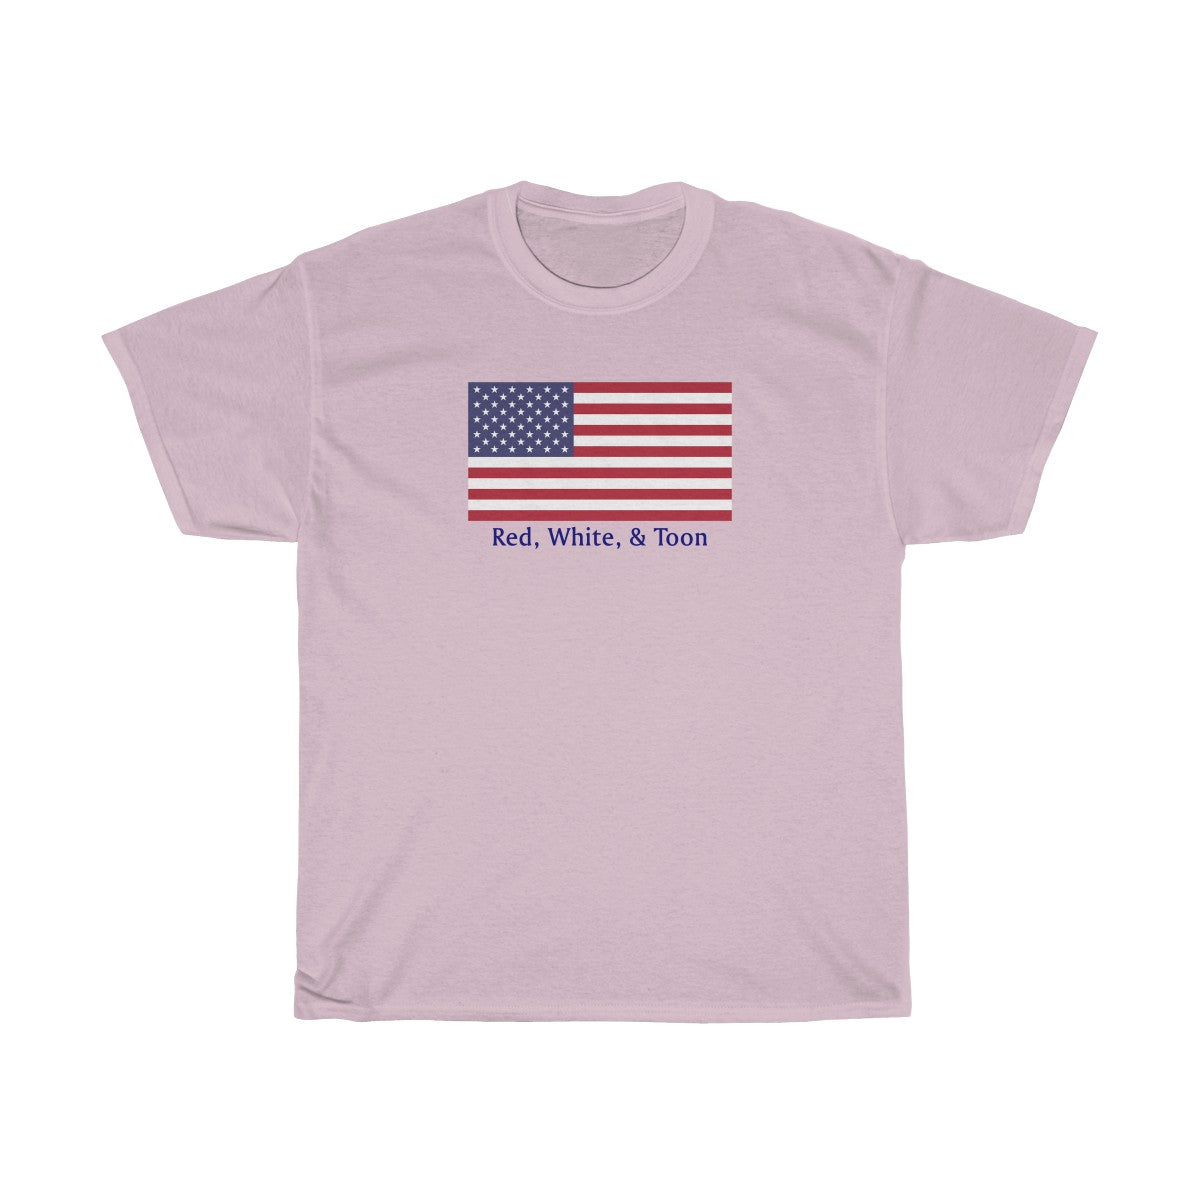 Classic Flag - Red White and Toon - NOTHING ON BACK